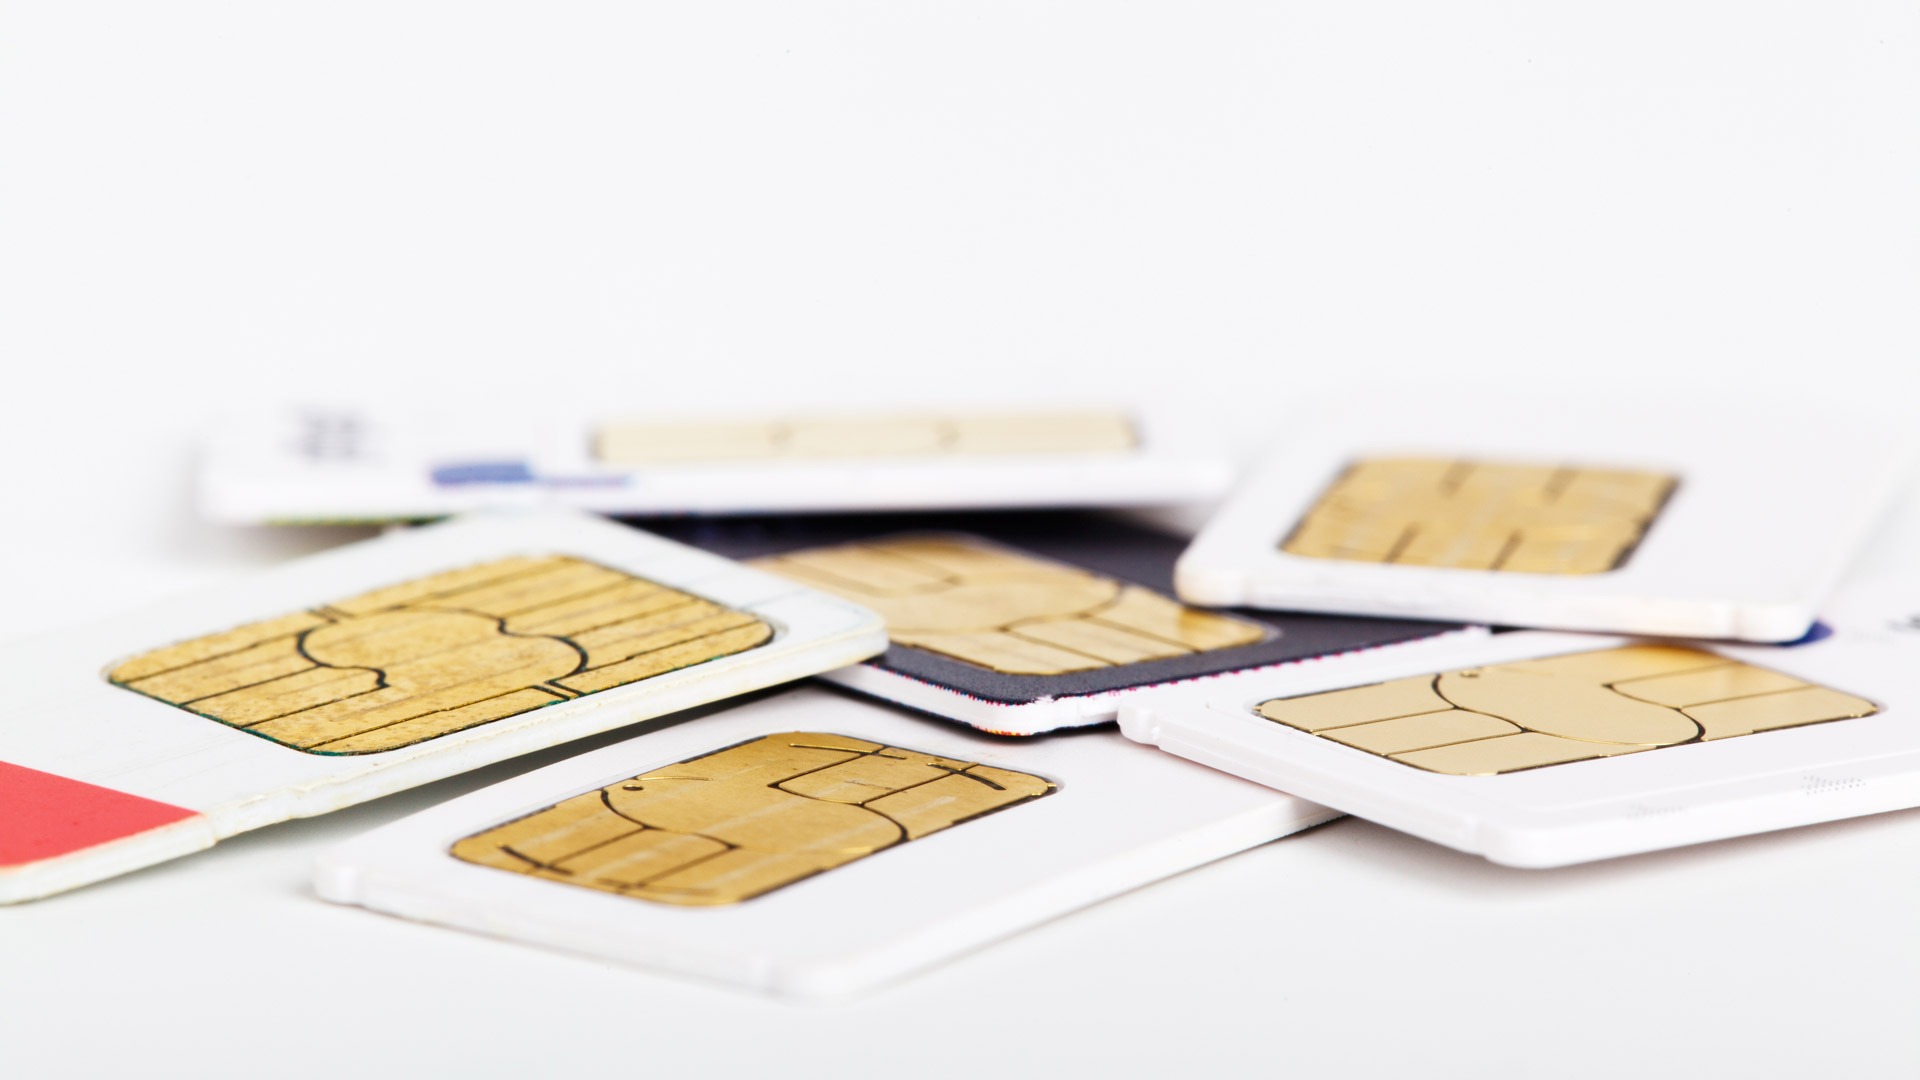 SIM swap fraud: a new wave of attacks targeting financial, online services in Africa